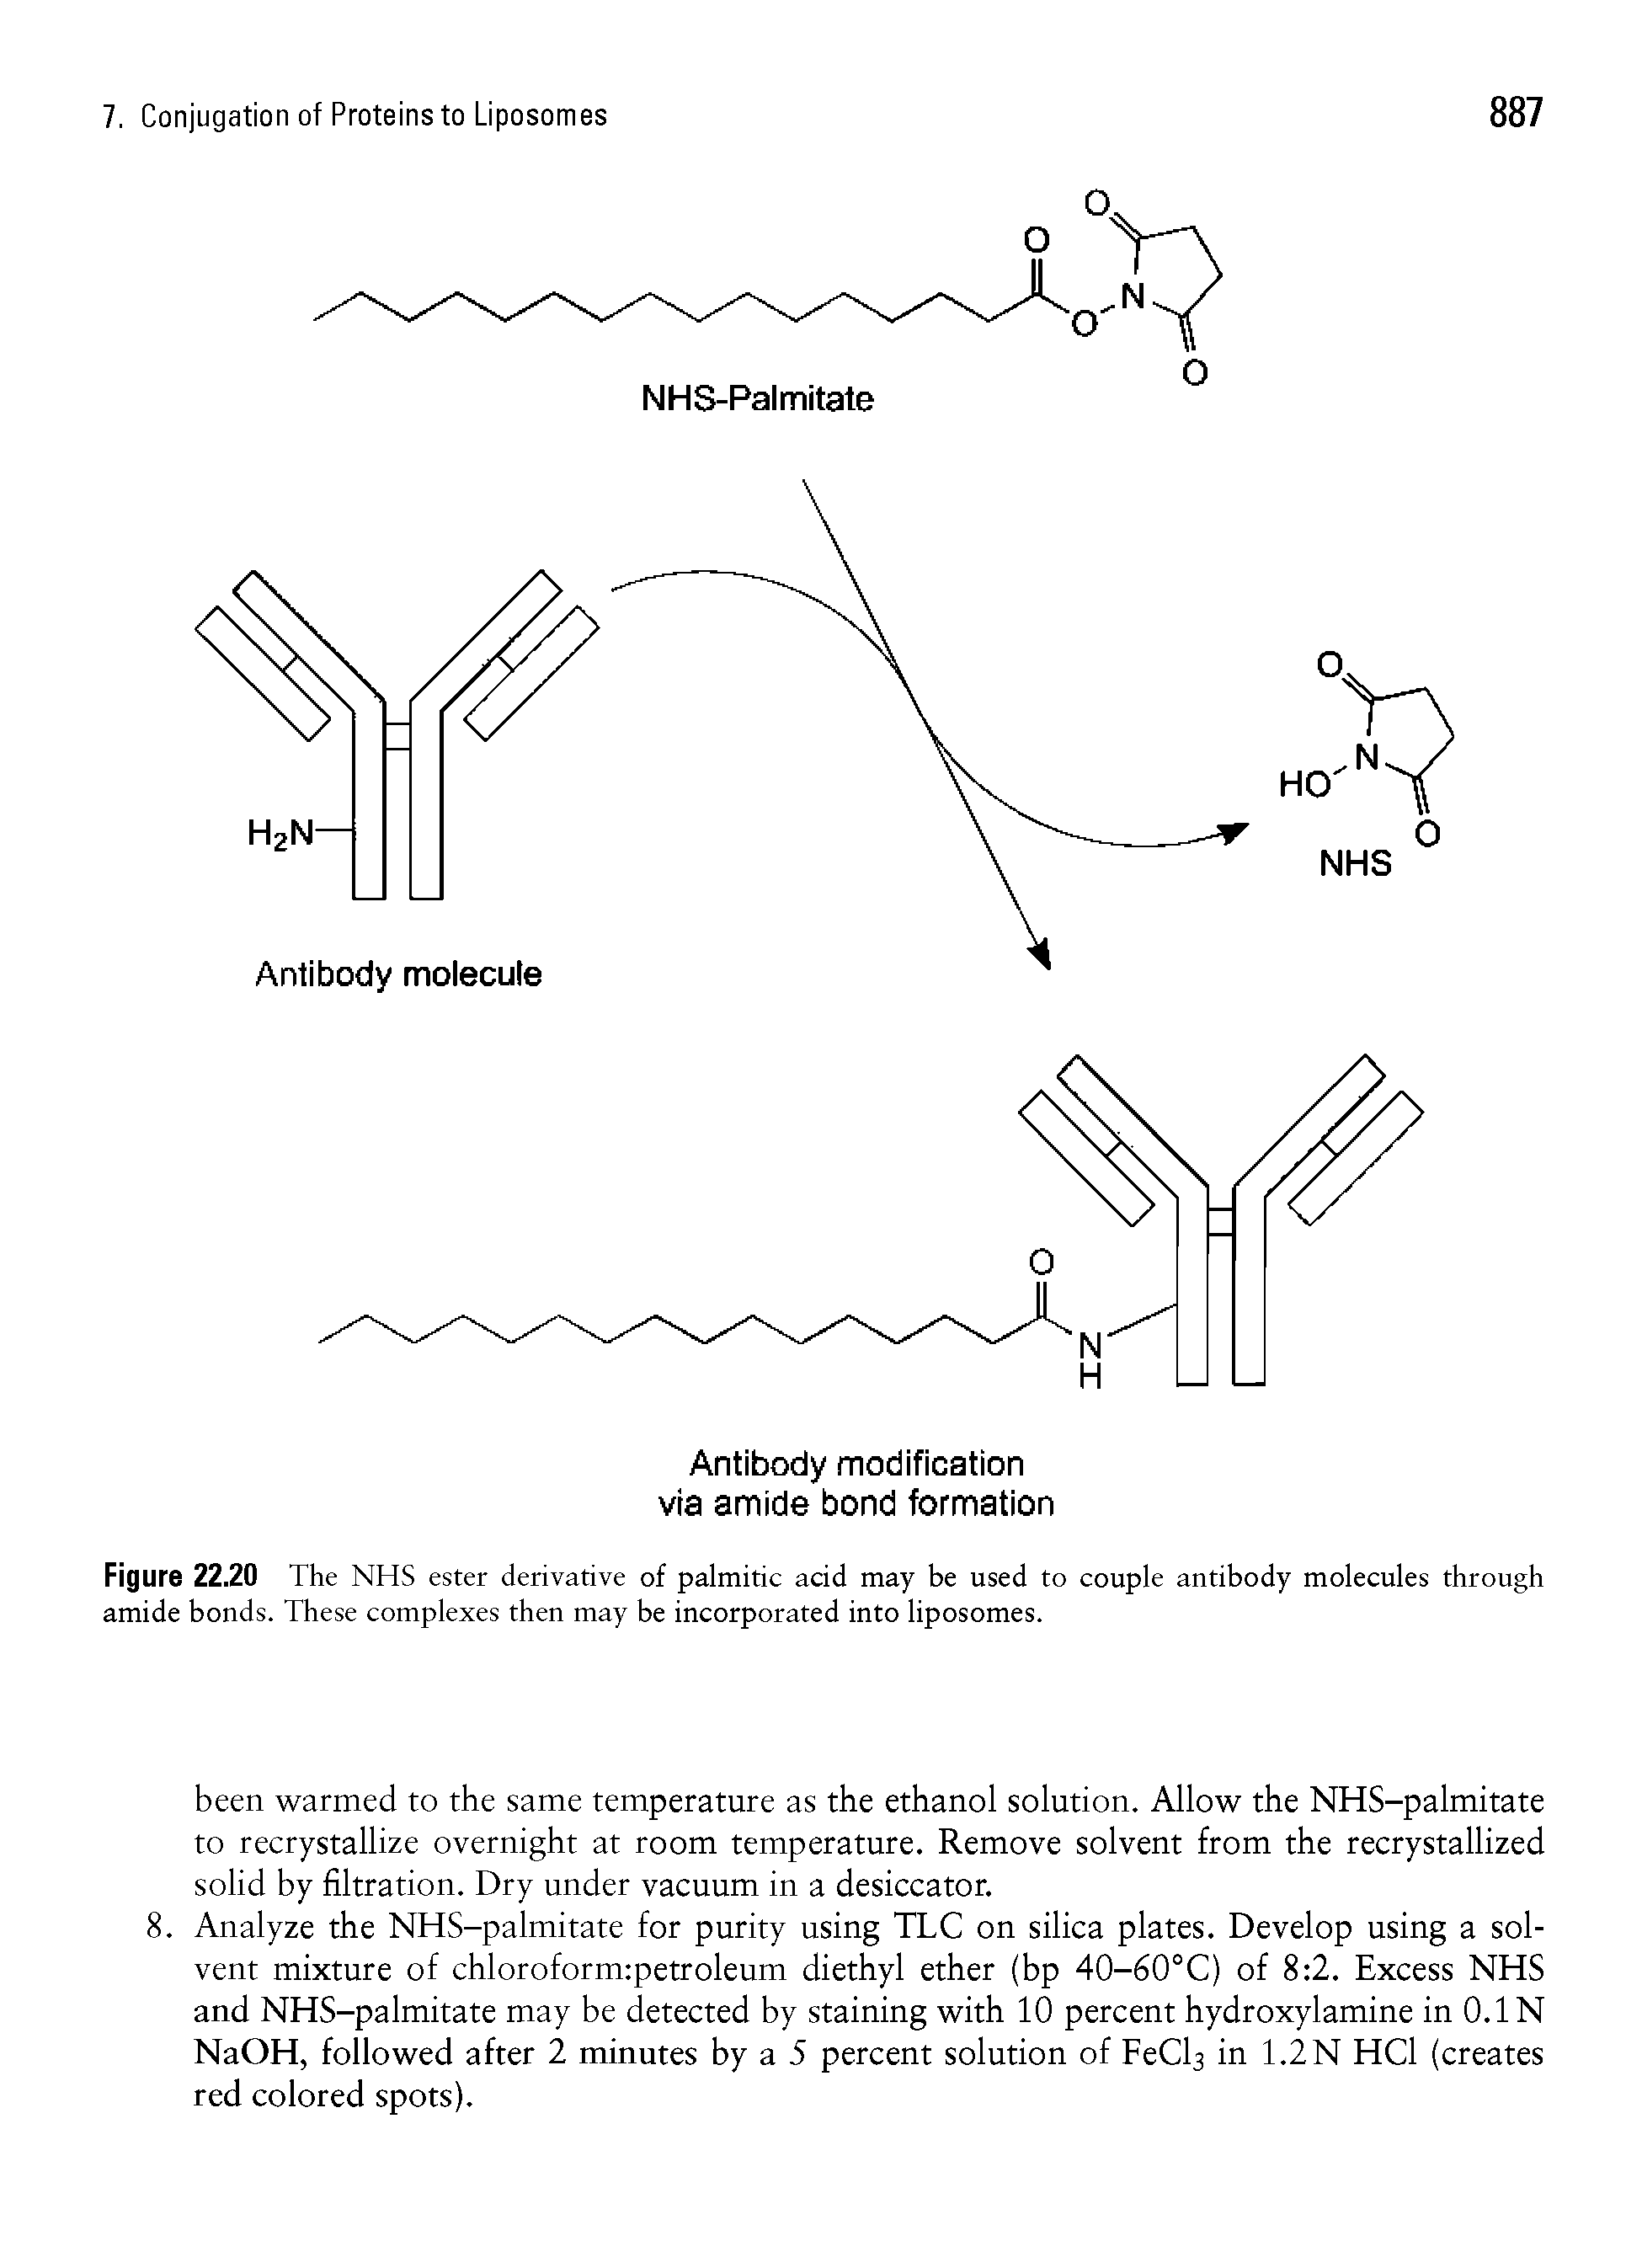 Figure 22.20 The NHS ester derivative of palmitic acid may be used to couple antibody molecules through amide bonds. These complexes then may be incorporated into liposomes.